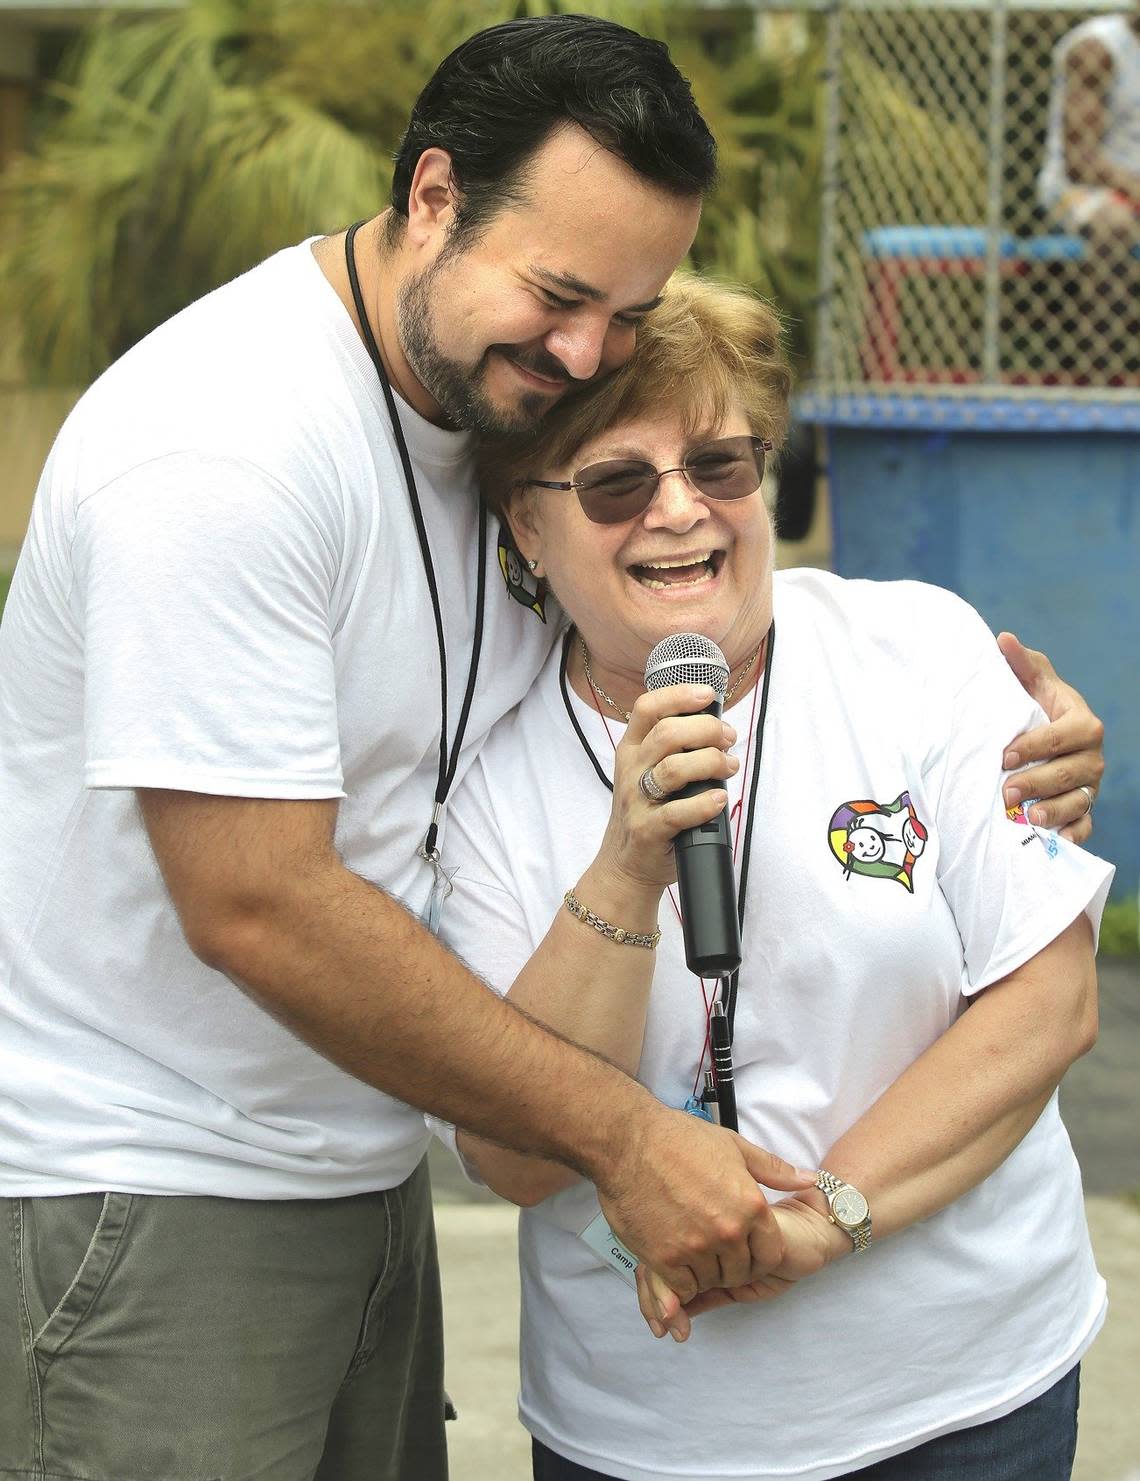 Athena Pefkarou, M.D., right, a pediatric hematologist oncologist at Nicklaus Children’s Hospital and director of Camp U.O.T.S., shares a hug with T.J. Morales on July 25, 2015. The two share a long association with the camp.